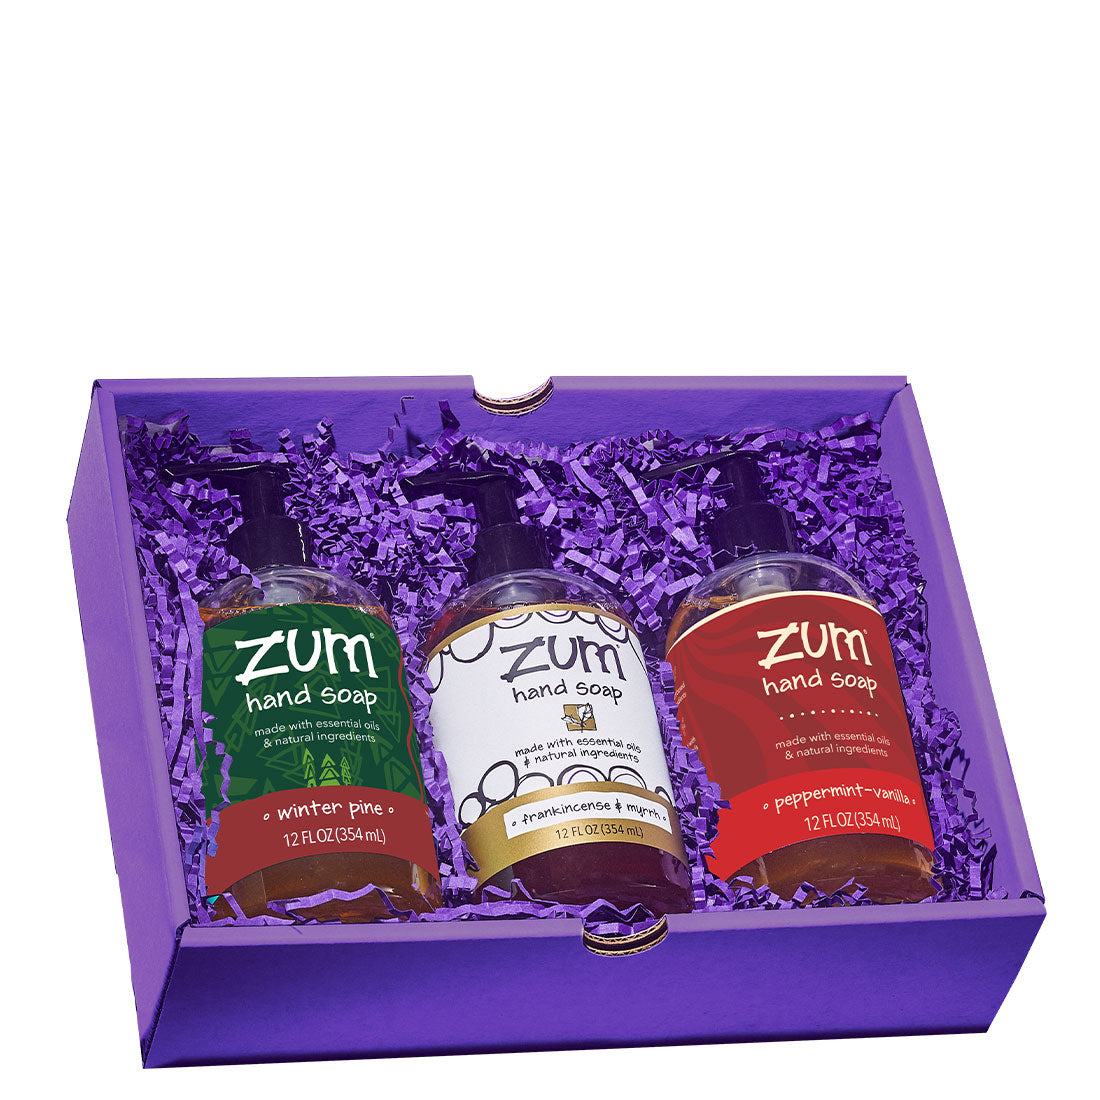 Three Zum Hands Soaps in a purple box with purple crinkle surrounding them.